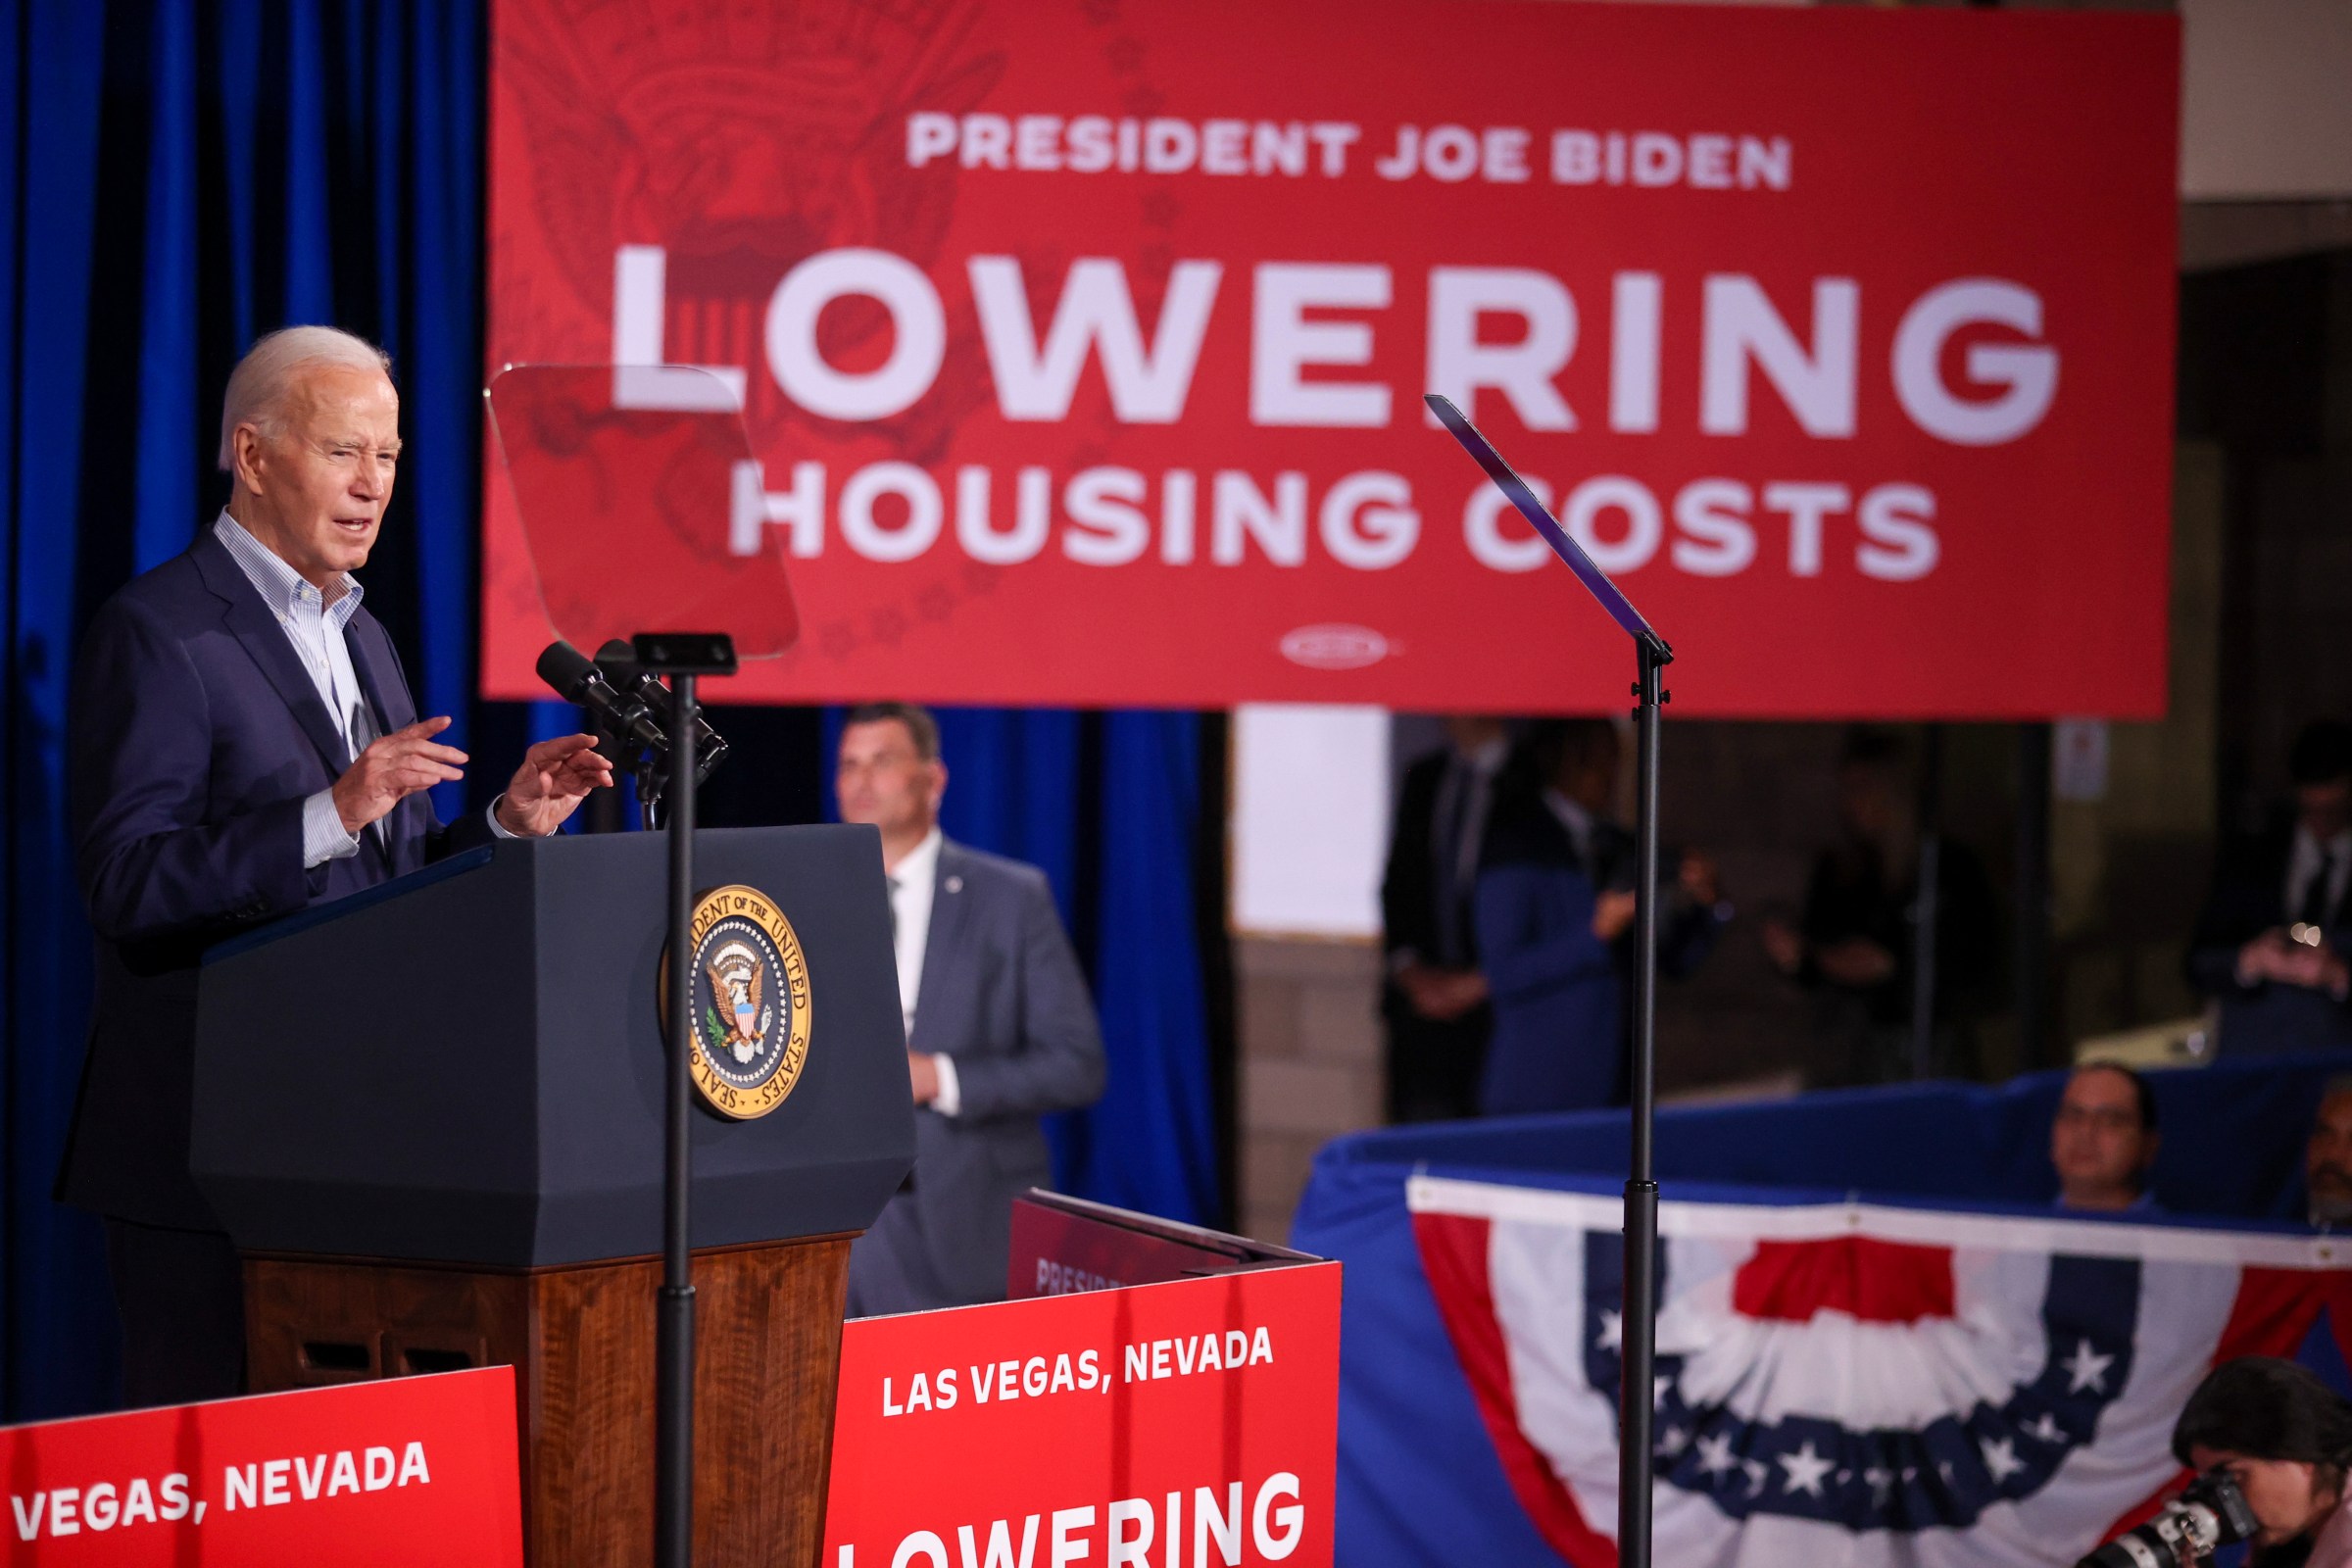 You can’t afford to buy a house. Biden knows that.